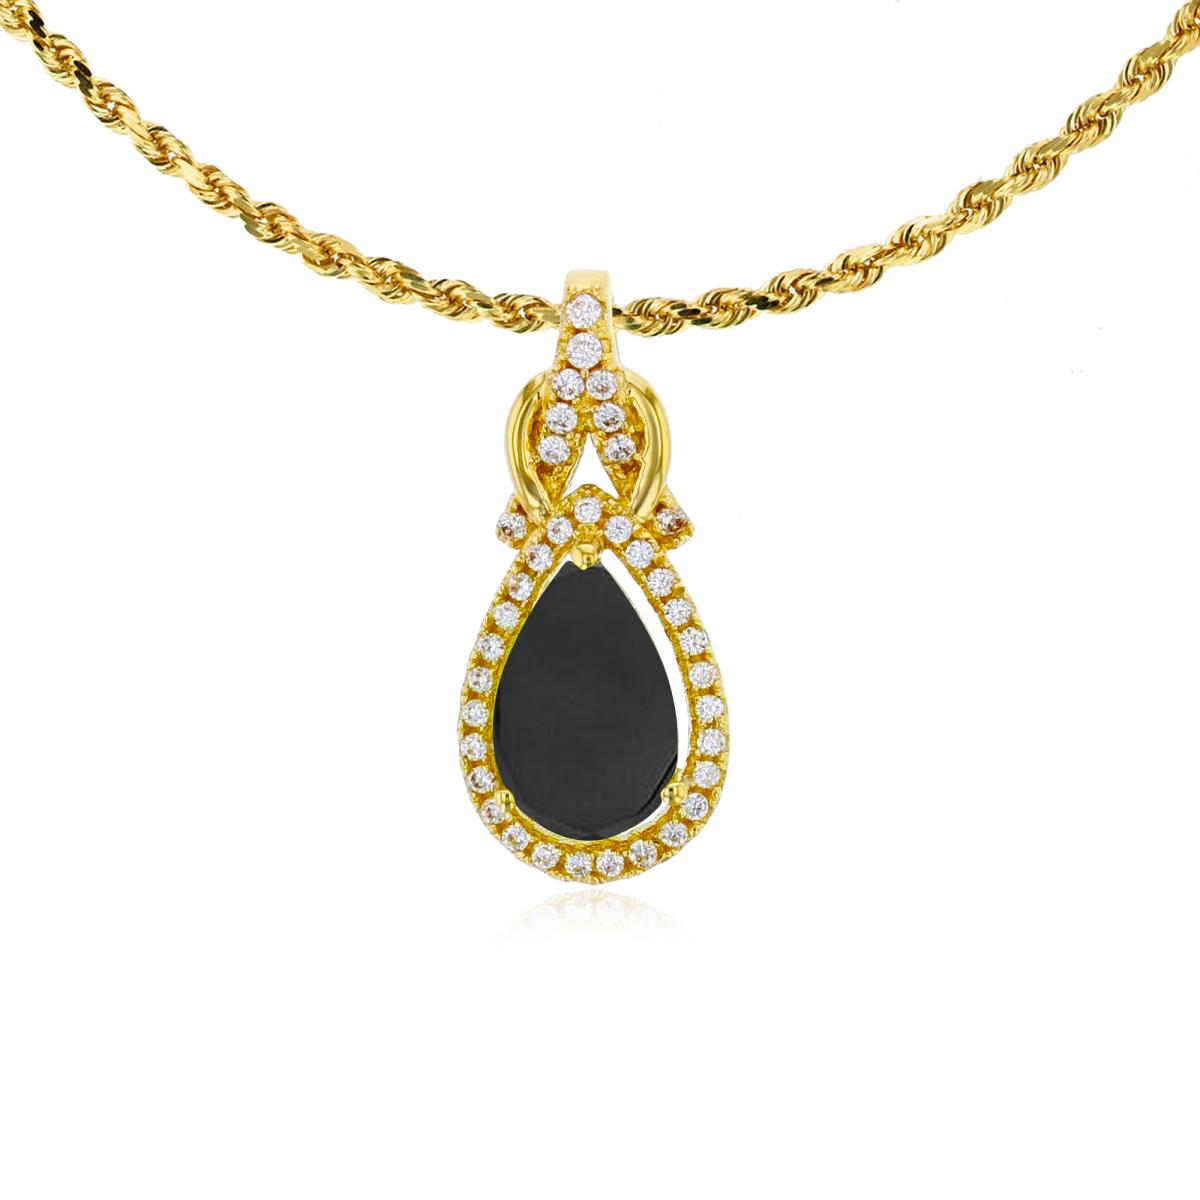 10K Yellow Gold 8x5mm Pear Cut Onyx & 0.11 CTTW Rnd Diamond Knot 18" Rope Chain Necklace